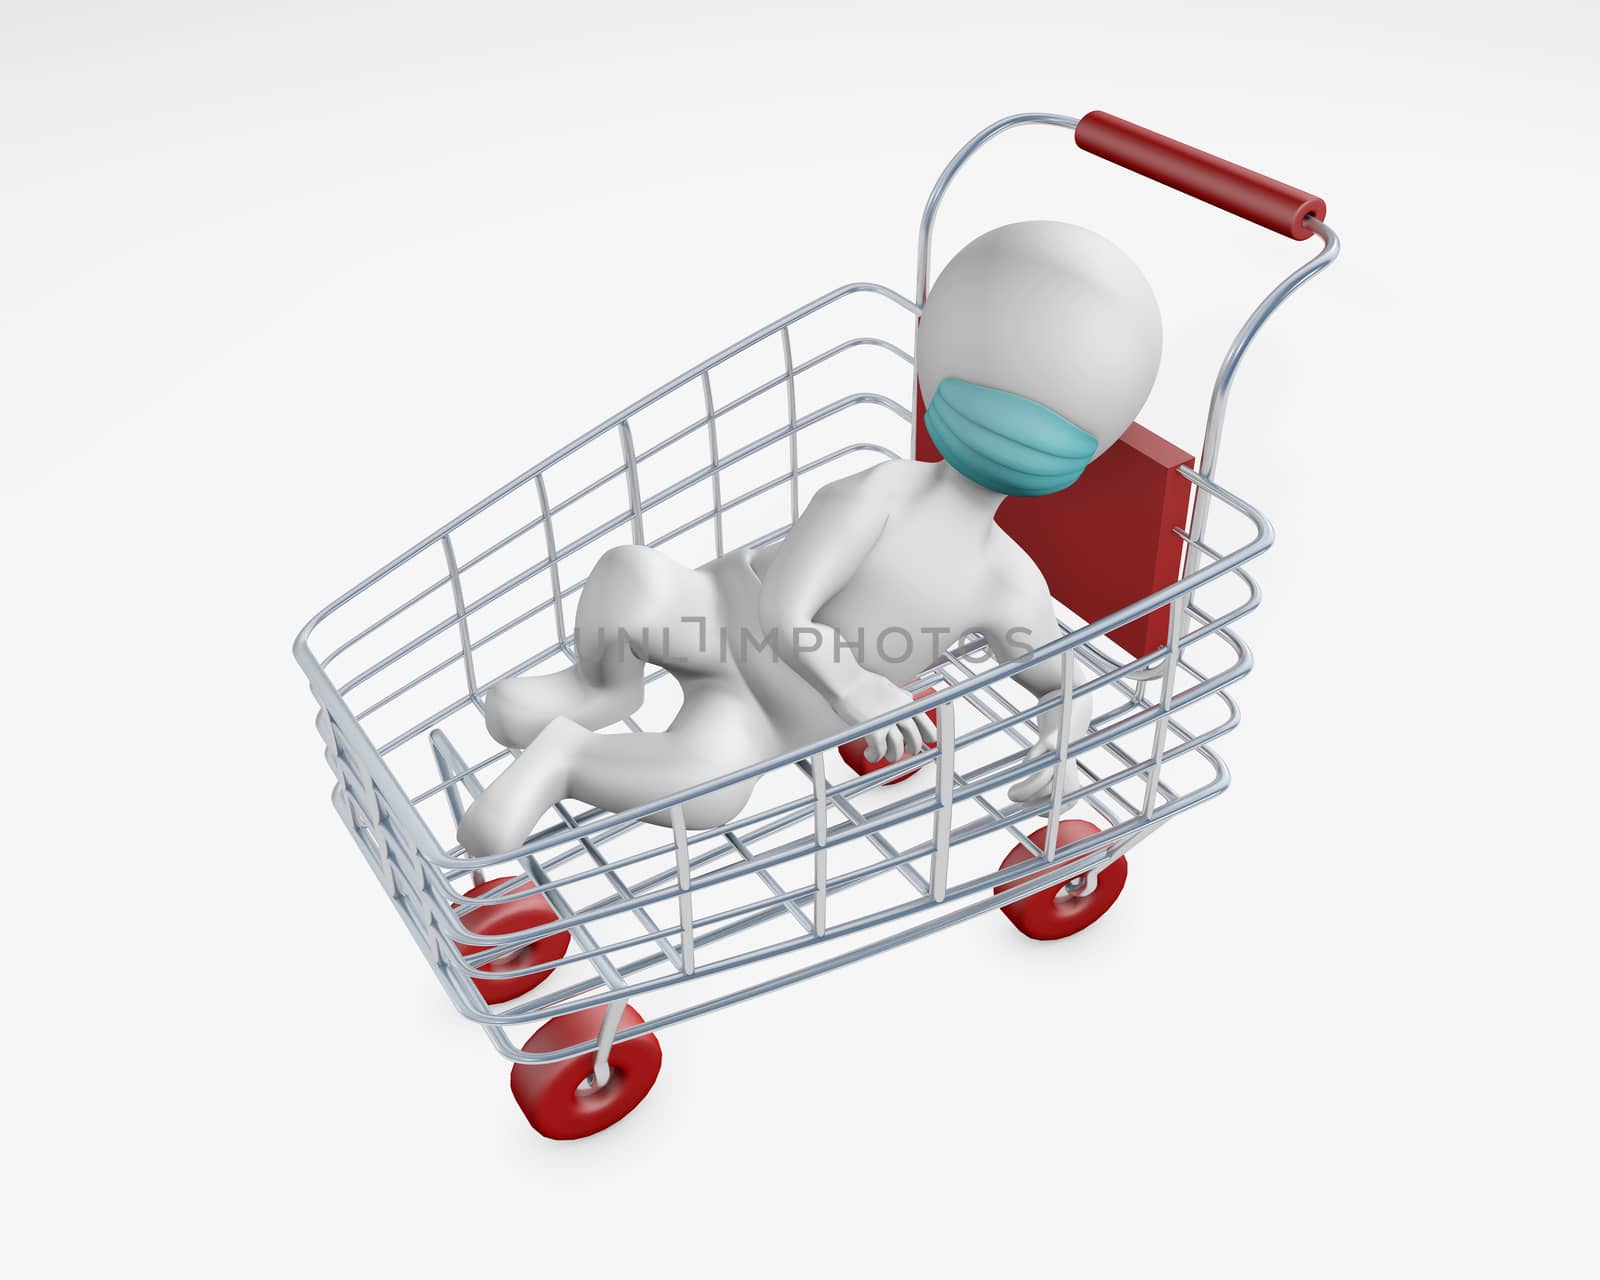 Fatty man with a mask in a shopping cart 3d rendering by F1b0nacci